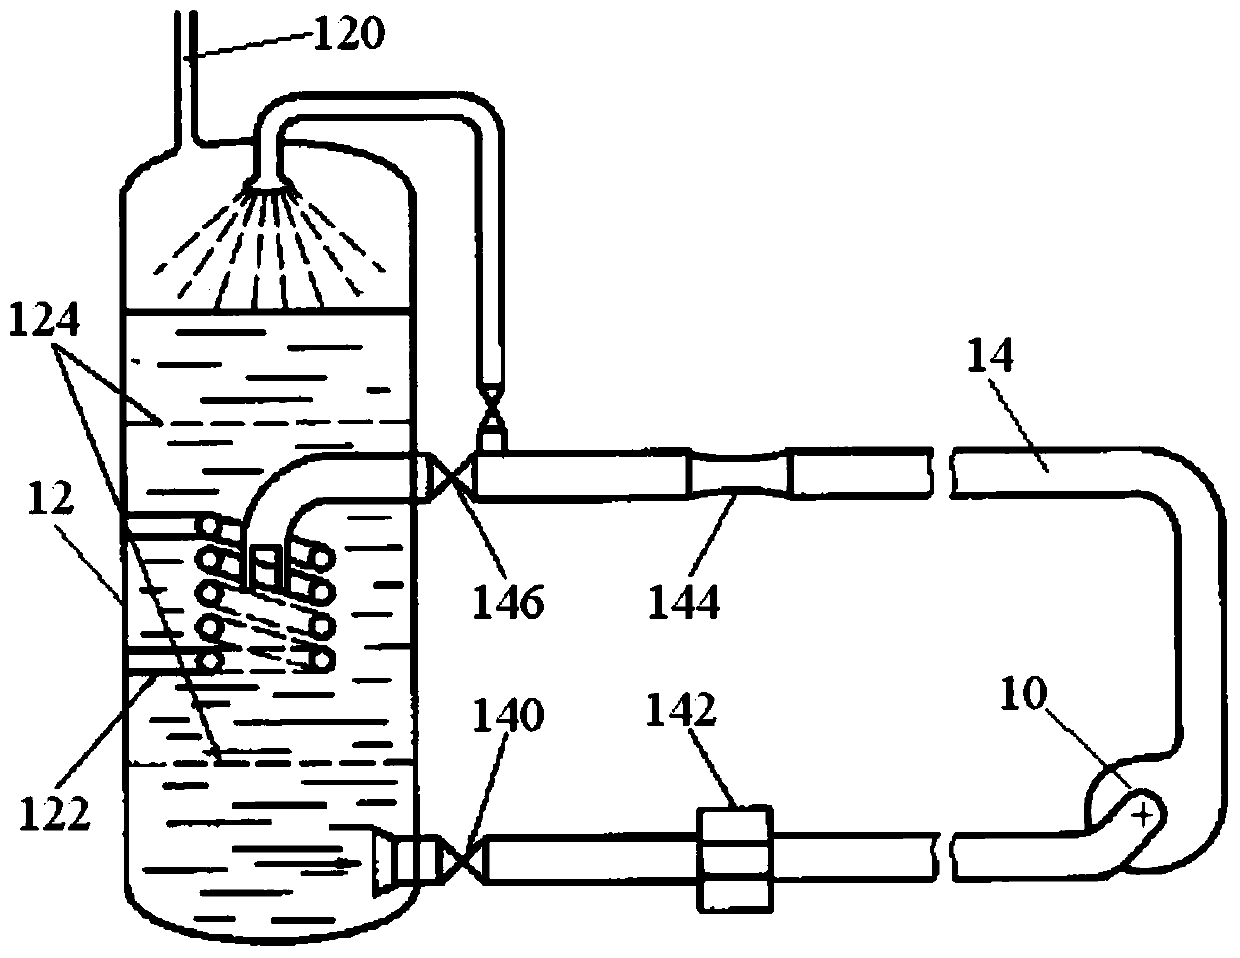 Adjustable flow energy dissipator installed inside the vessel for nuclear power plant